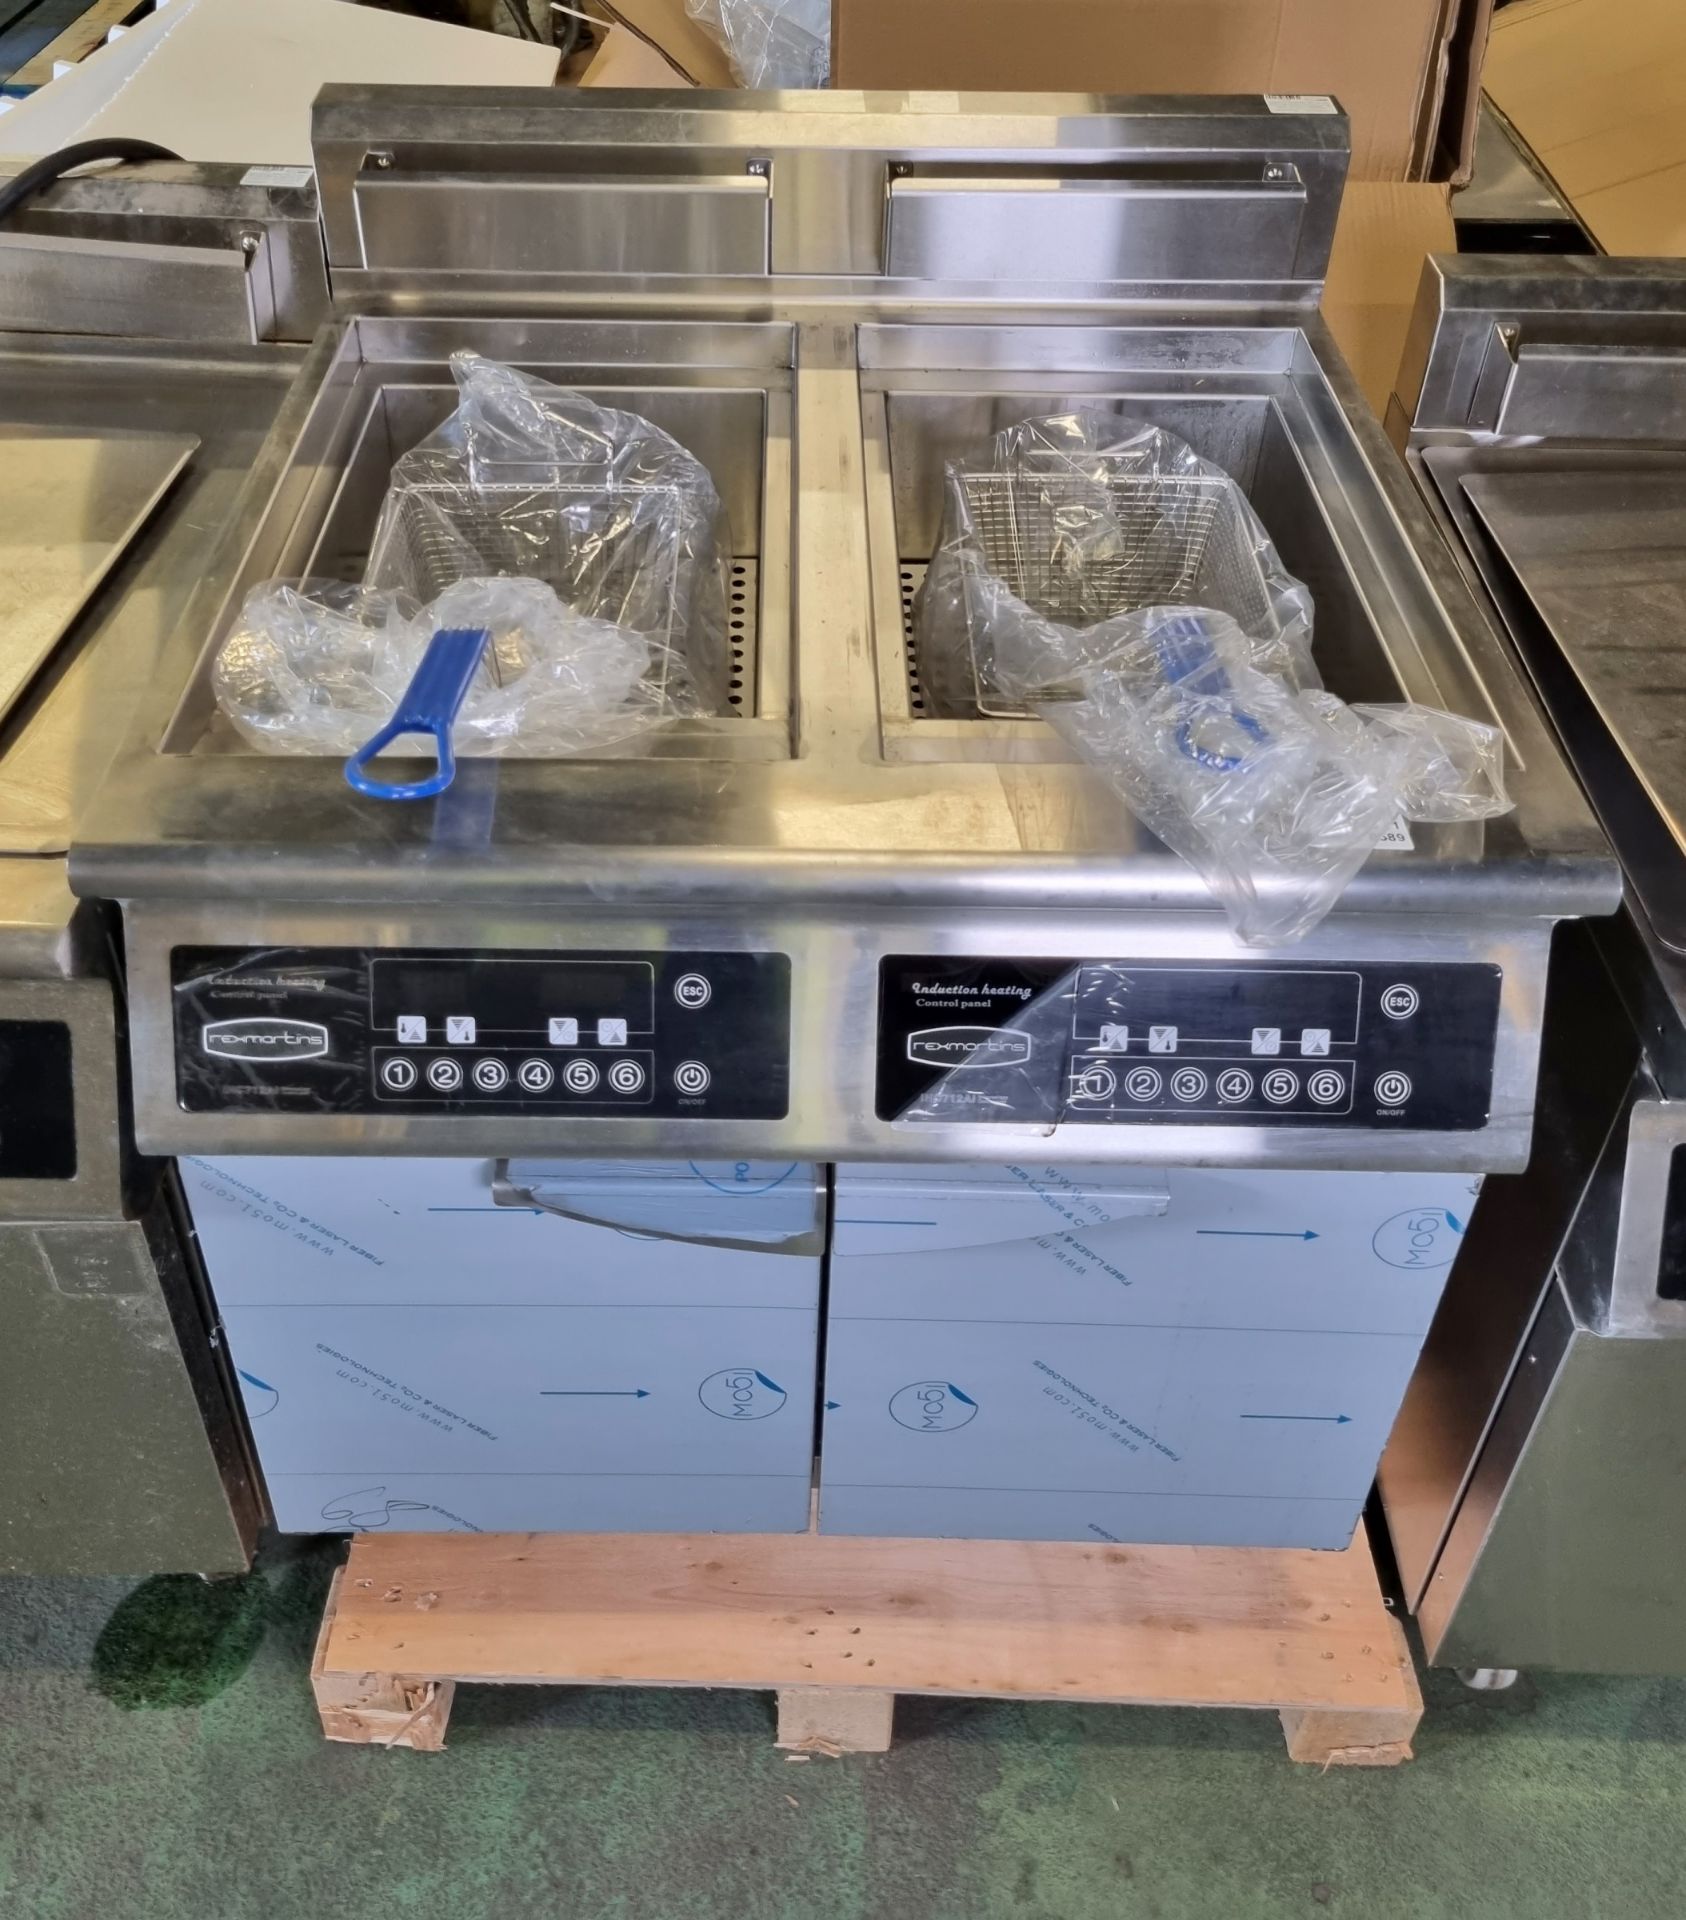 Rexmartins RESC-8B-16 free standing electric induction fryer - double tank with baskets - W 800 - Image 3 of 4